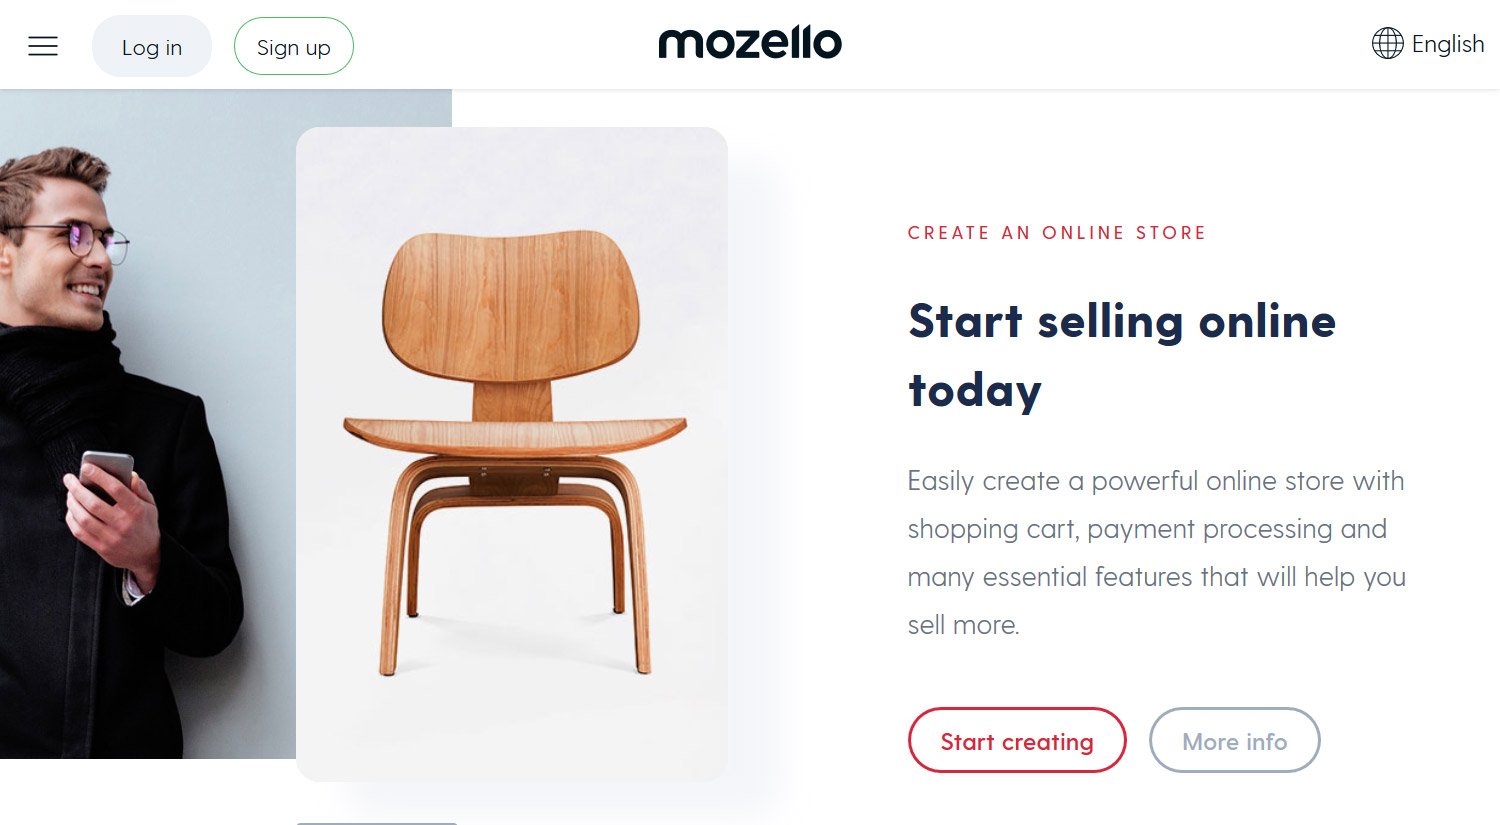 Free online store design and templates with Mozello